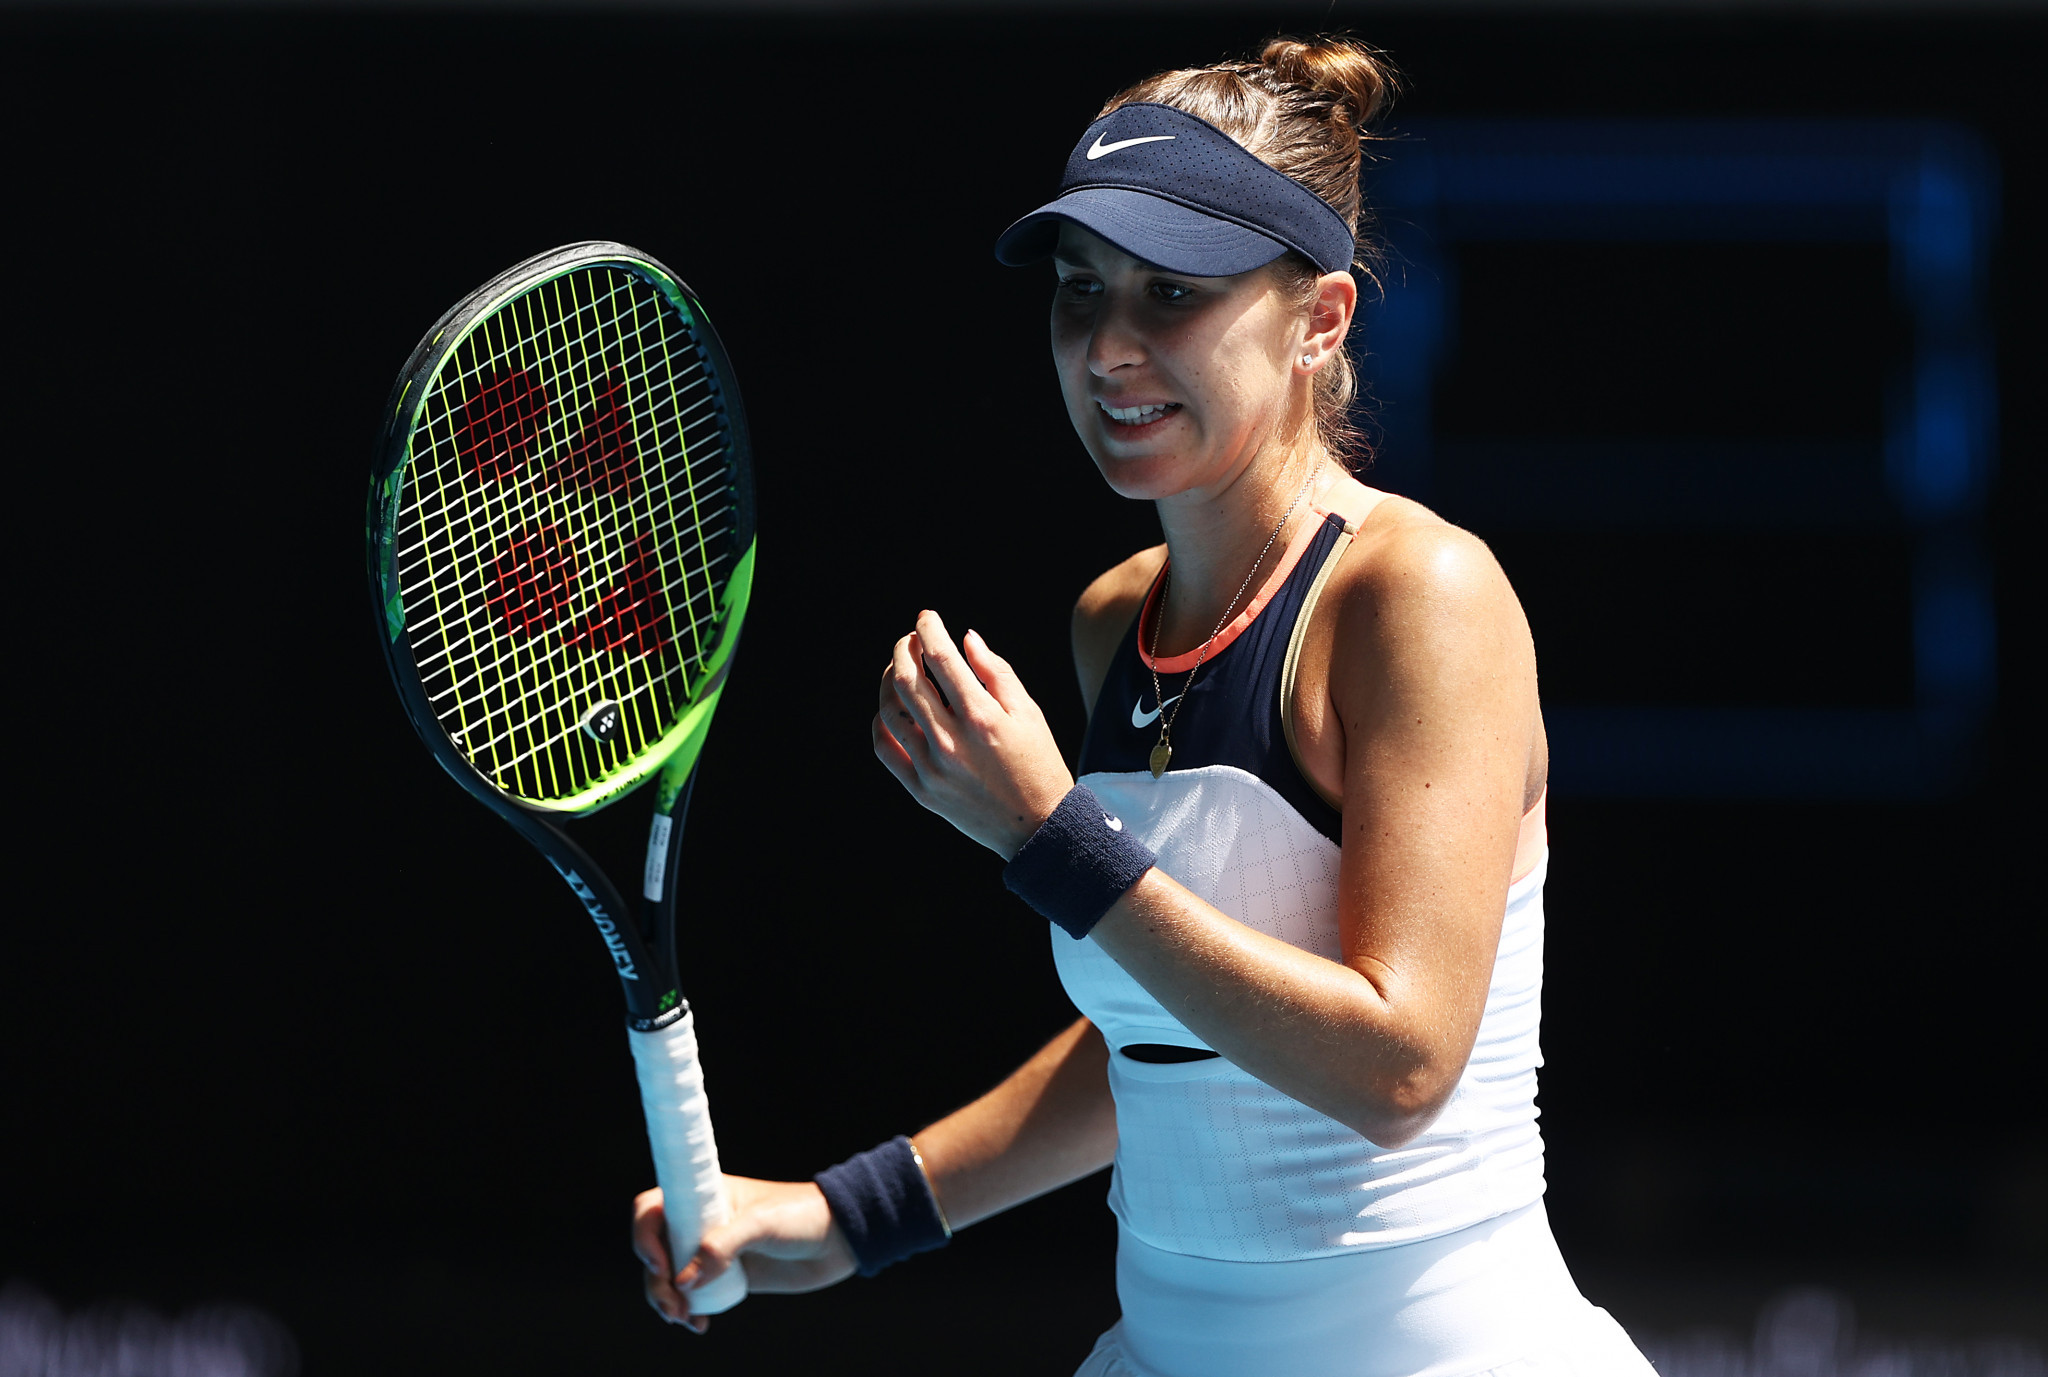 Belinda Bencic, the 12th seed, was made to work hard by Svetlana Kuznetsova for her three set victory ©Getty Images